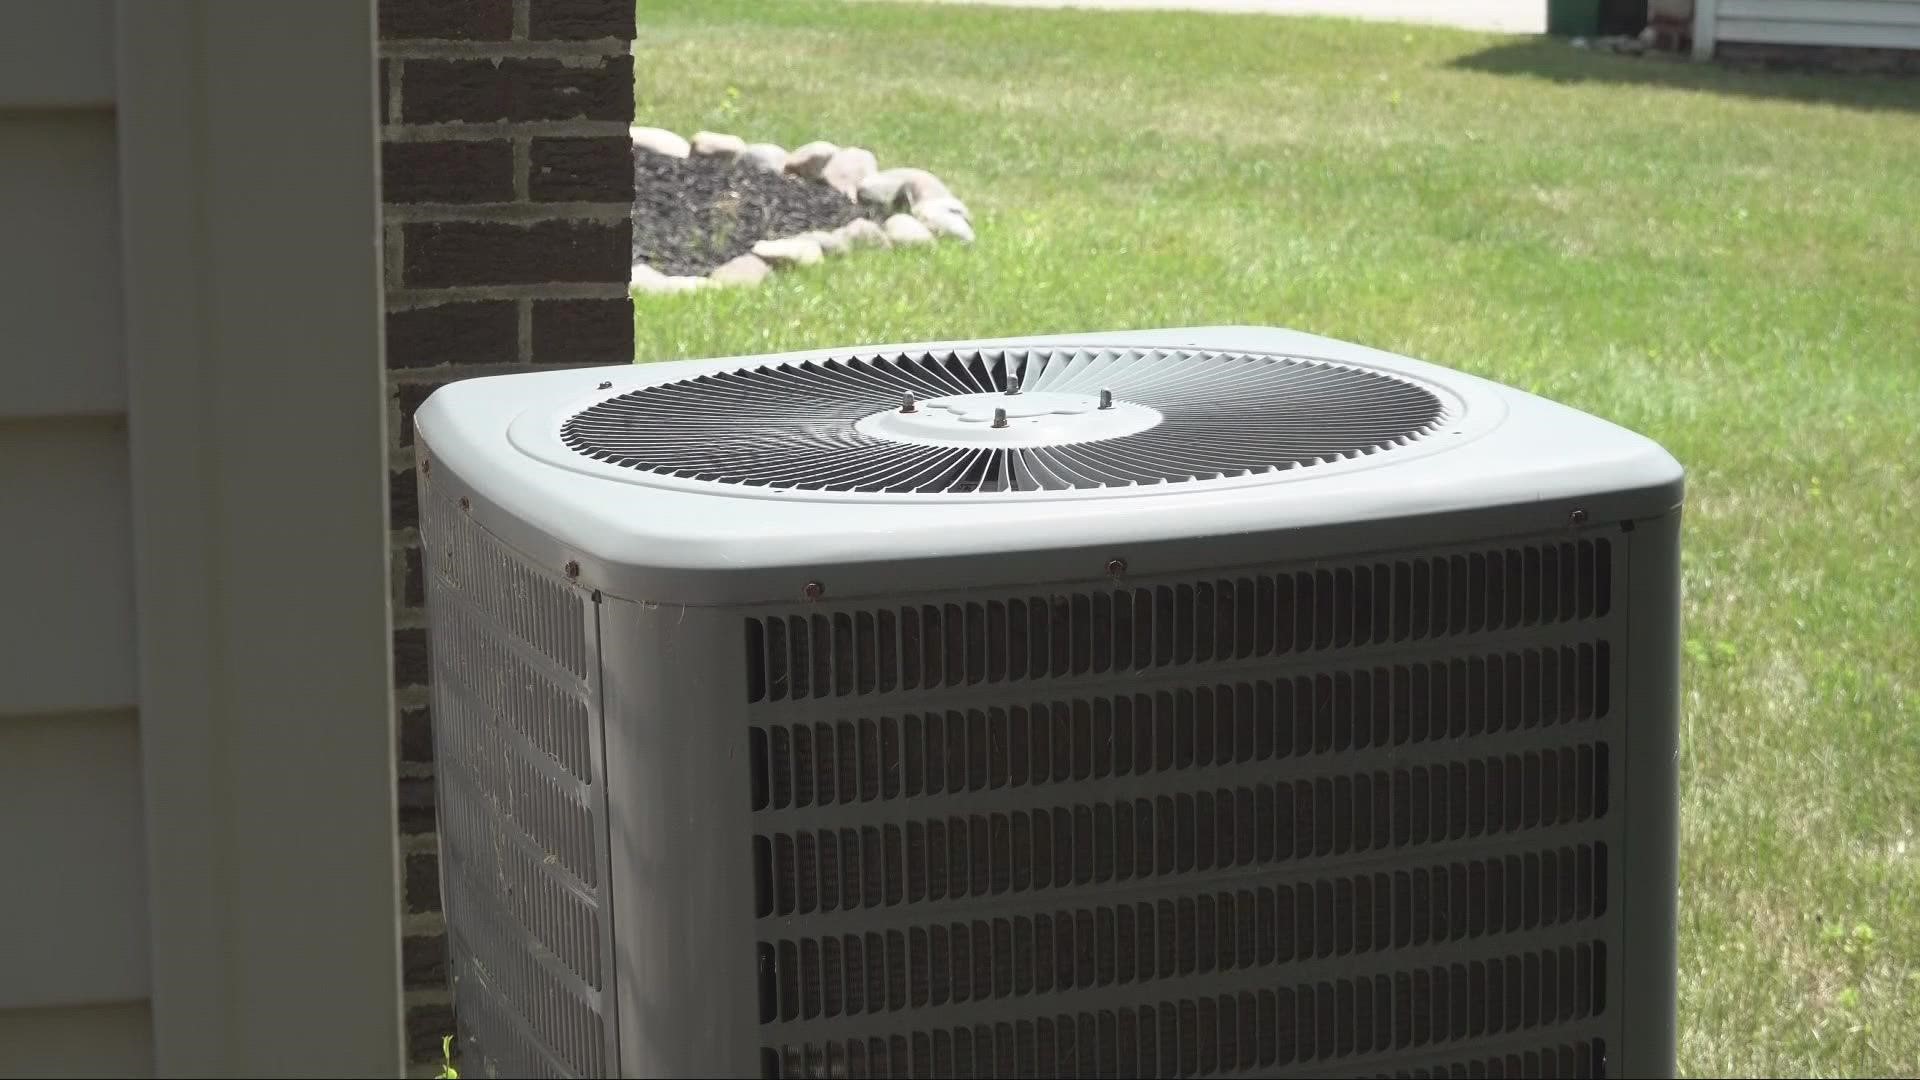 Energy prices have risen significantly the past few months.  And on a hot day like today, many people are asking themselves if it is worth running the AC.